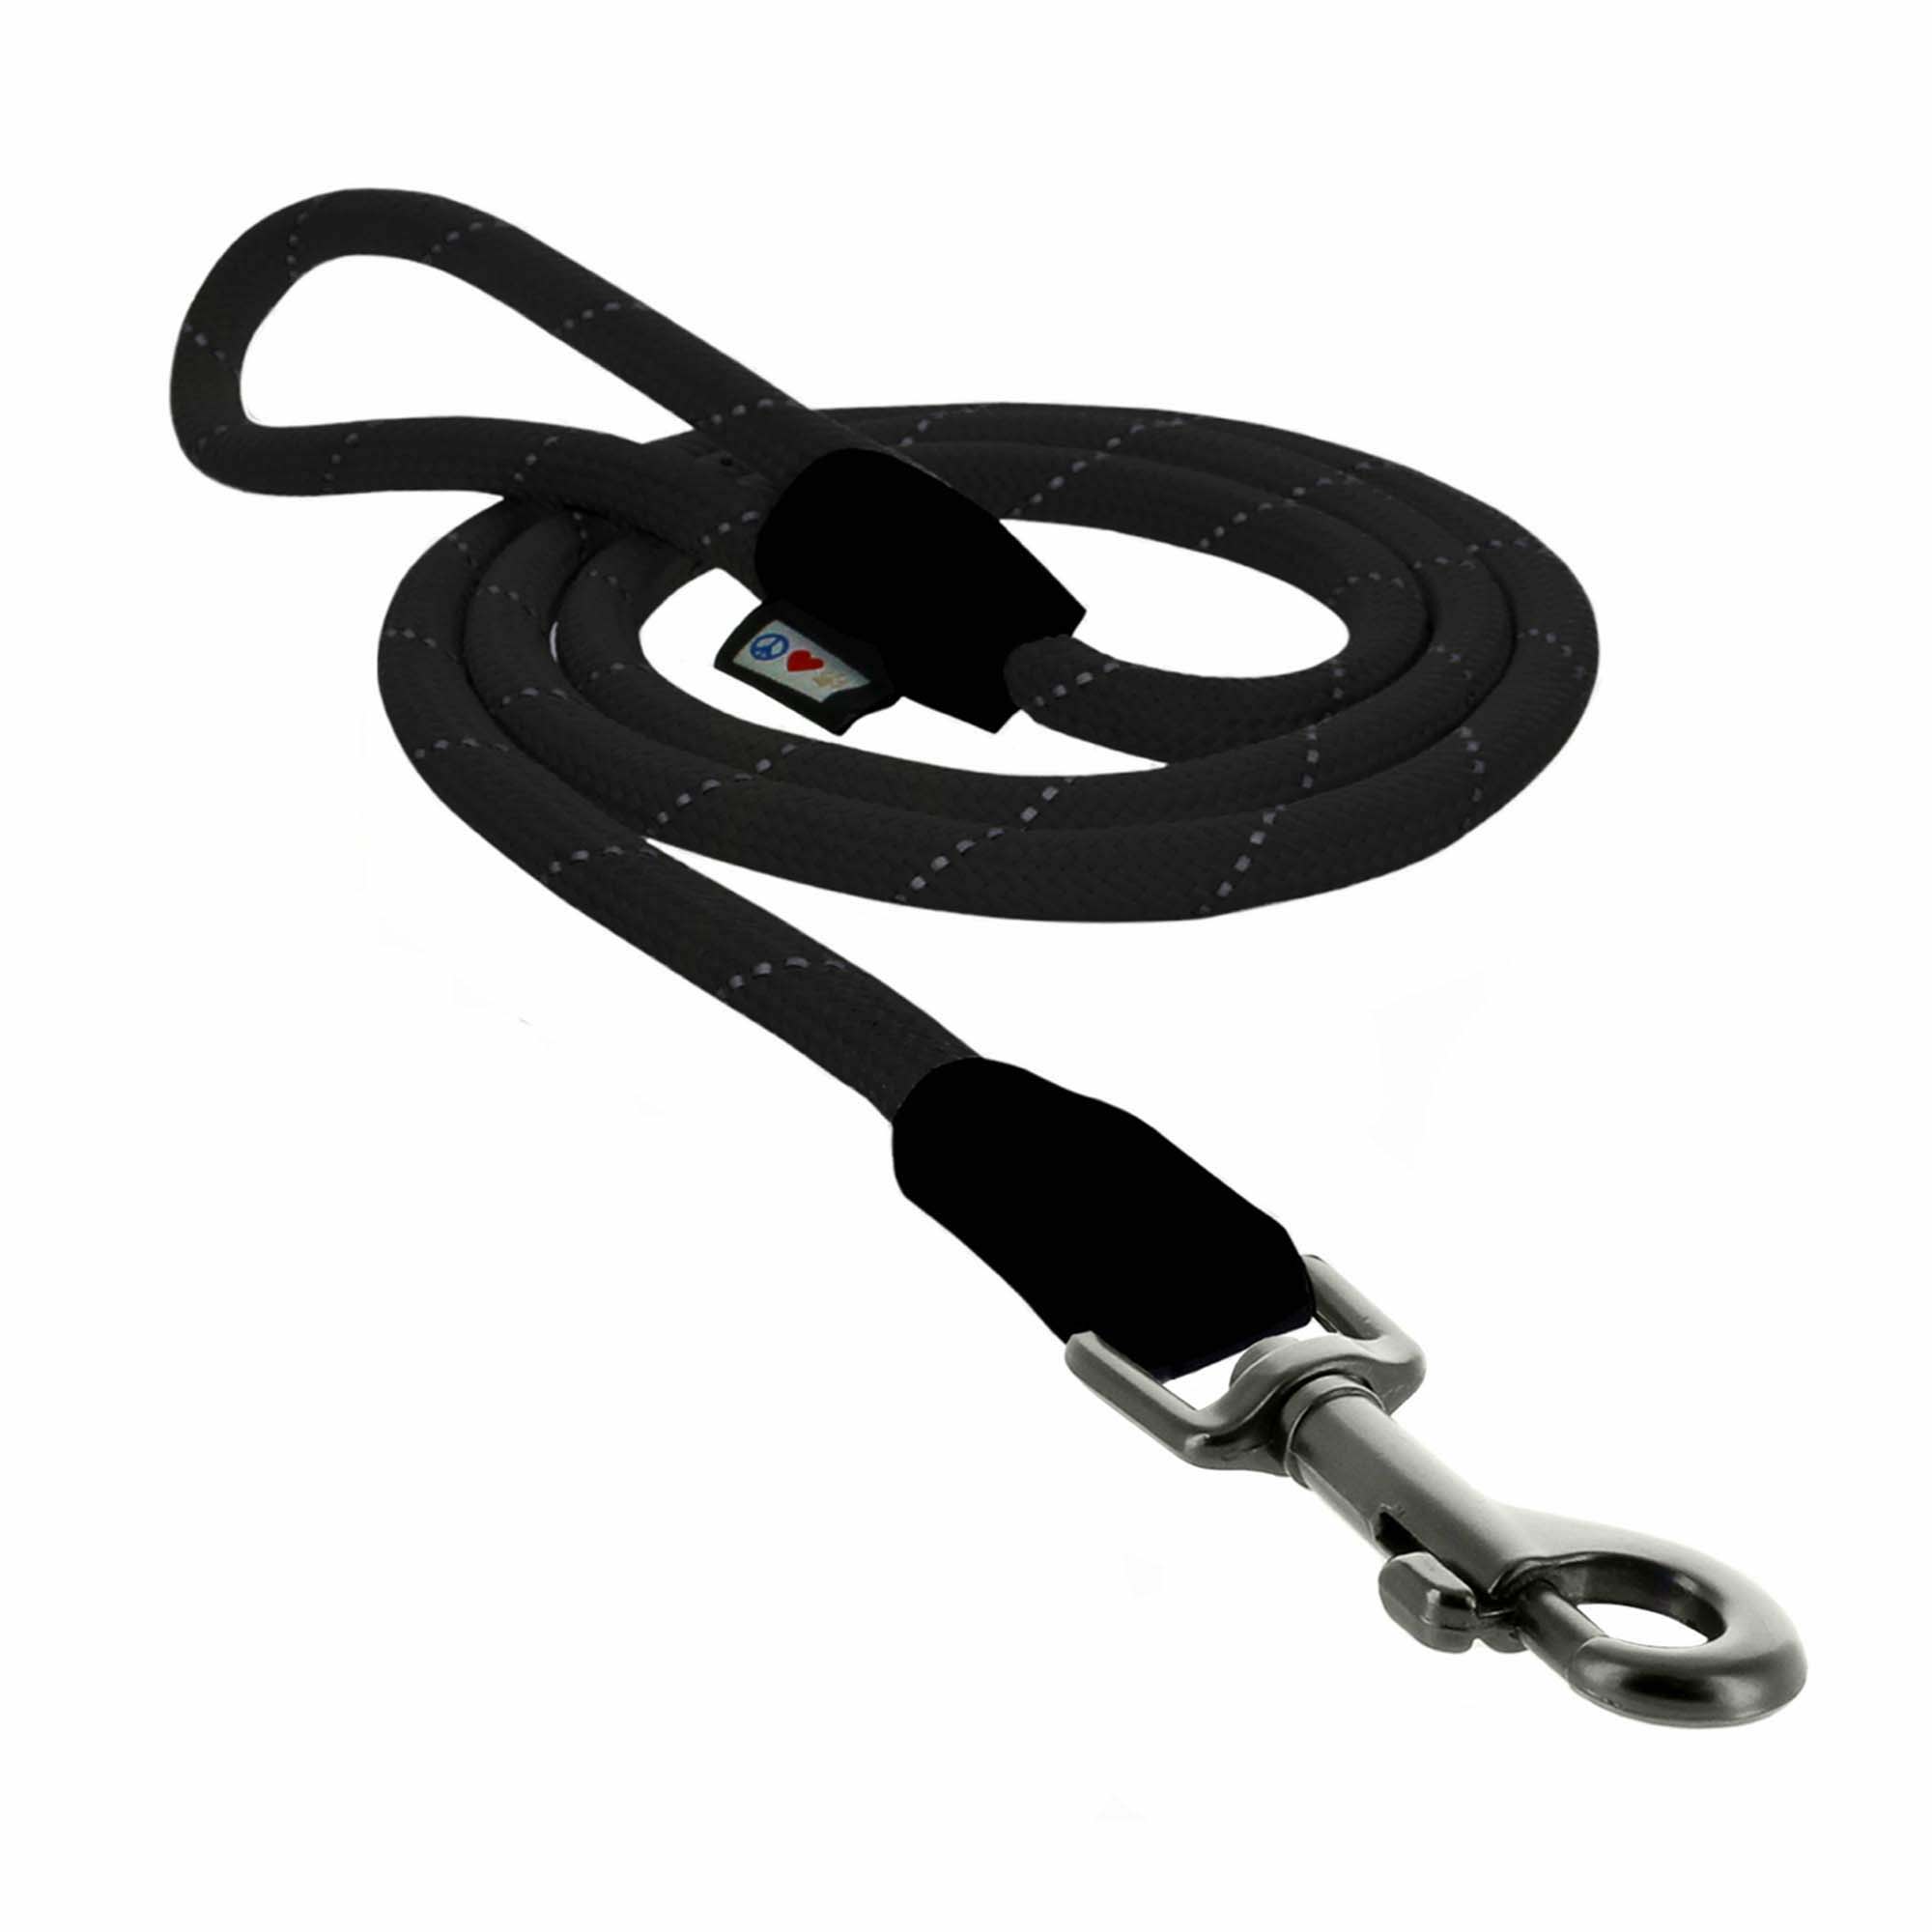 Heavy Duty Small Medium Breed Braided 6' Dog Leash for Dogs Up To 65 Pounds 